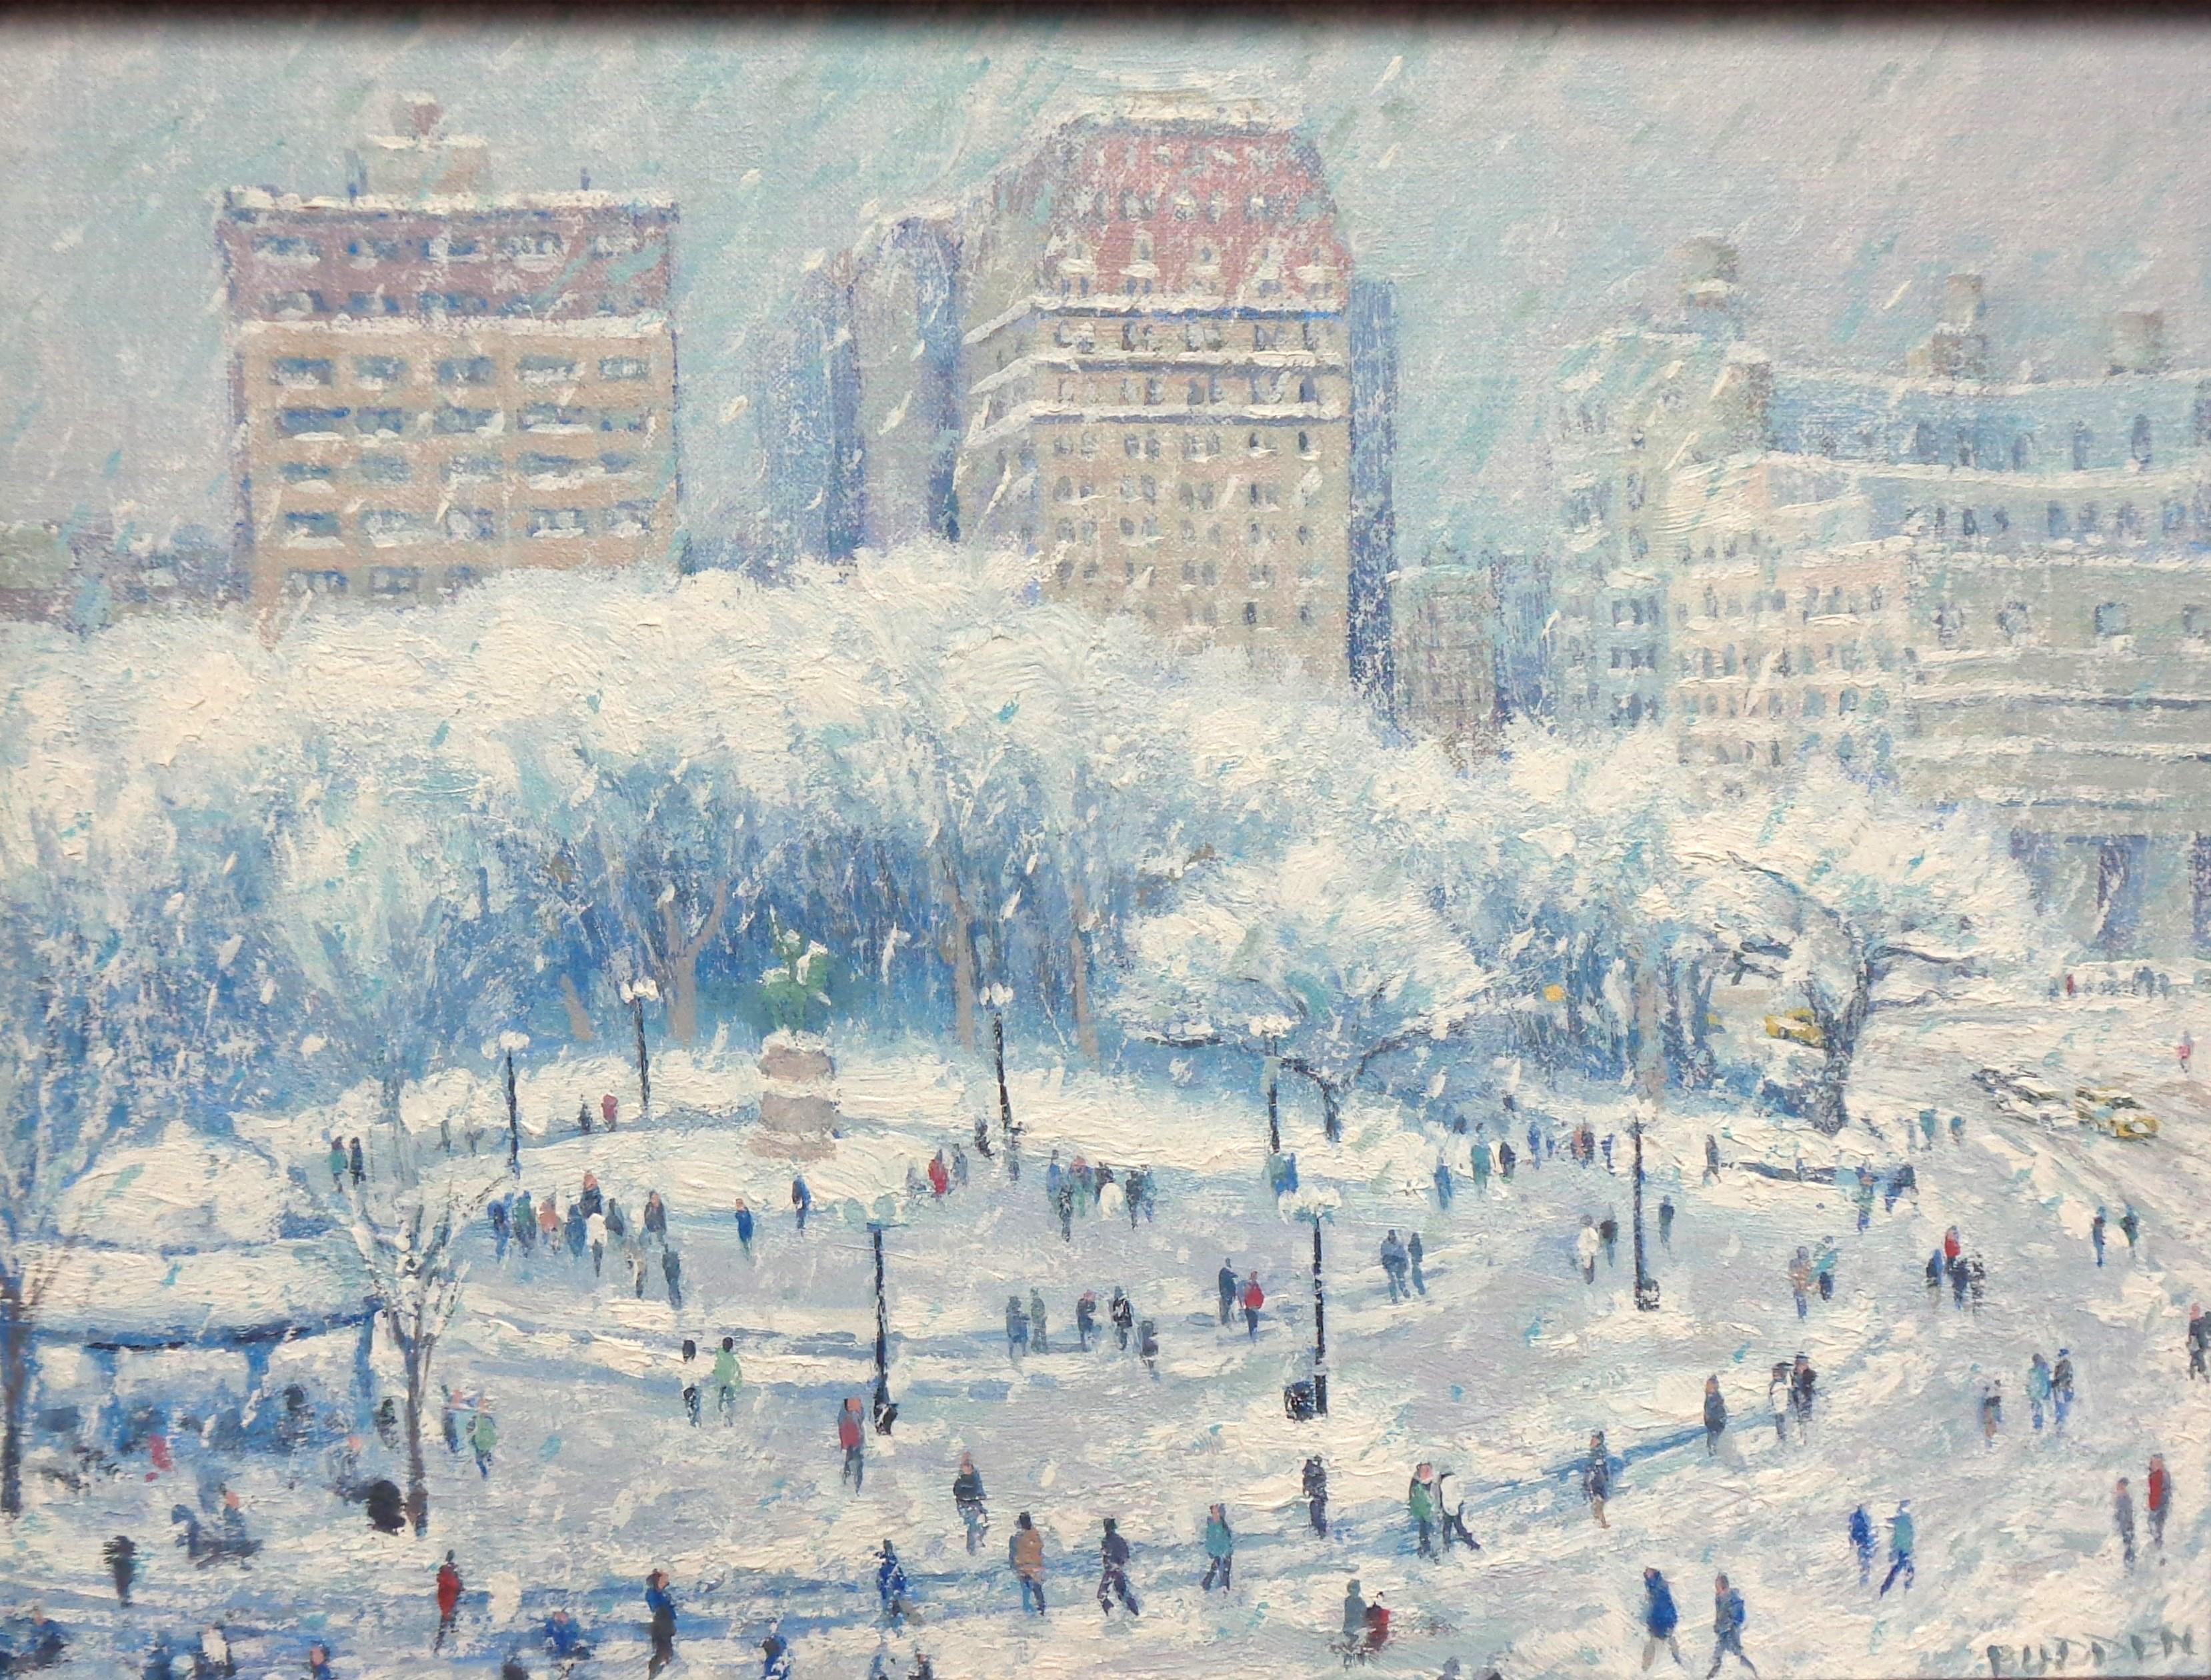  New York City Snow Oil Painting Michael Budden Winter Union Square For Sale 1